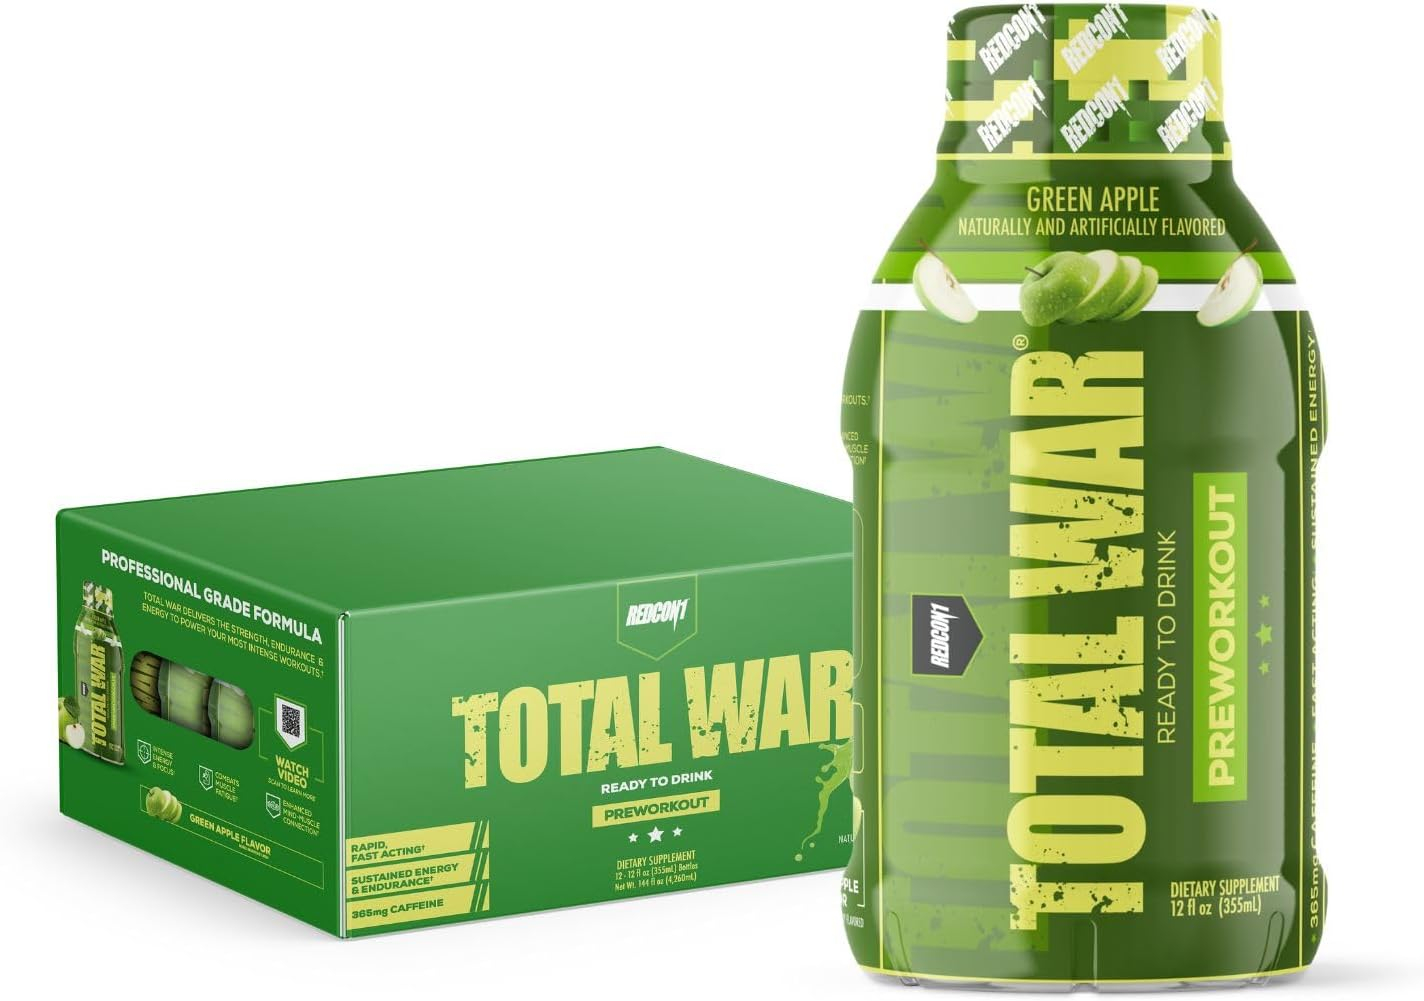 REDCON1 Total War Ready to Drink Preworkout, Green Apple - 350mg of Fast Acting RTD Caffeine - Beta Alanine + Citrulline Malate for Increased Pump - Keto Friendly Workout Drink (12 Servings)